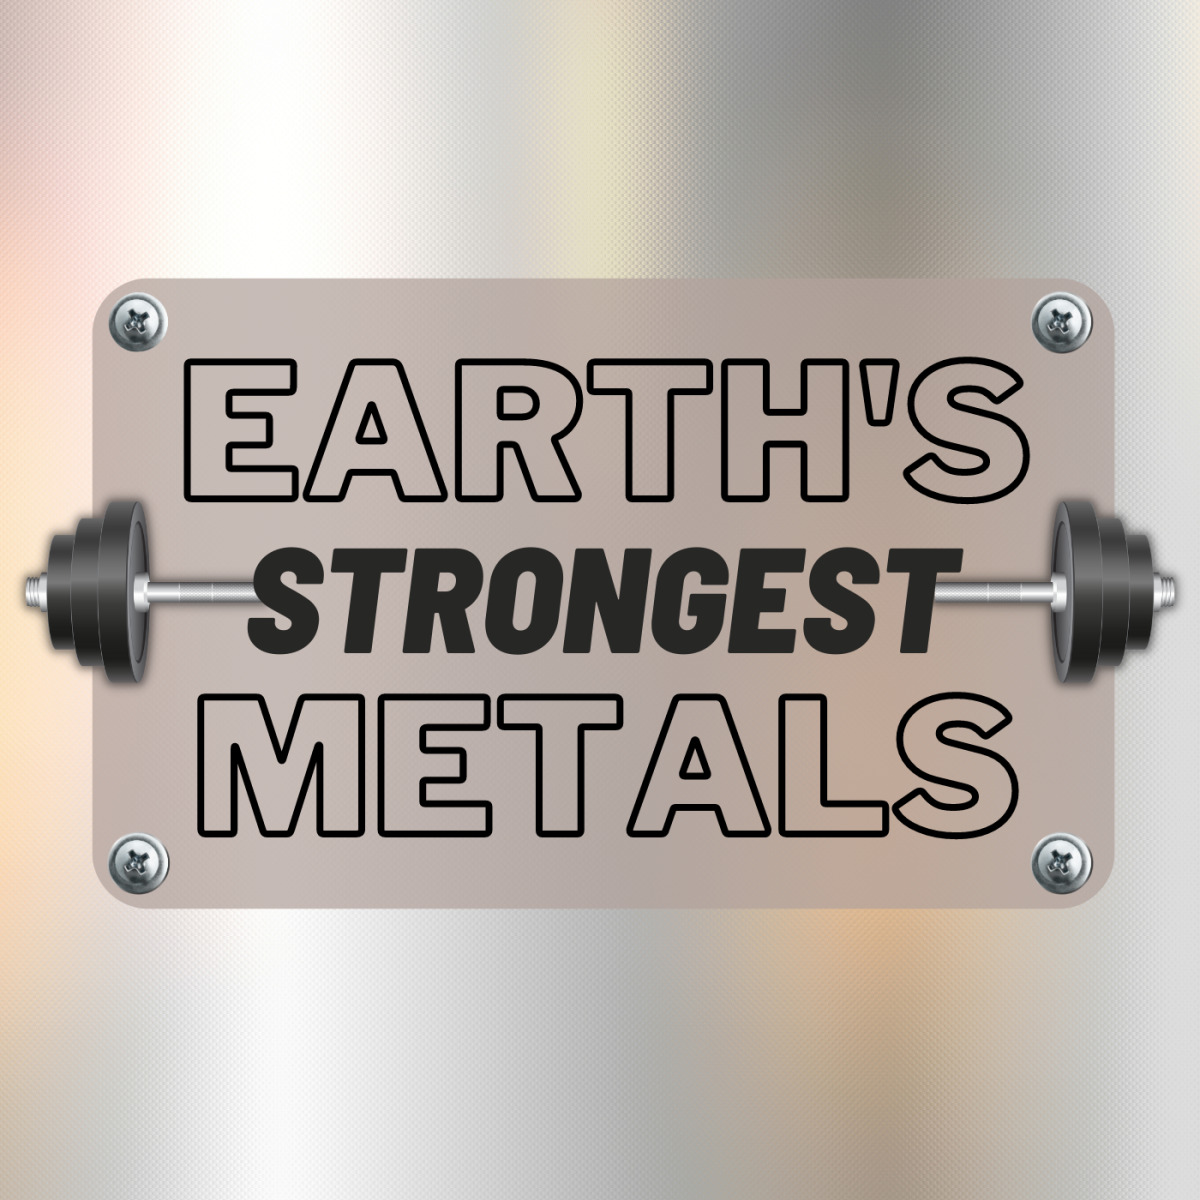 What Are the Strongest and Hardest Metals on Earth?